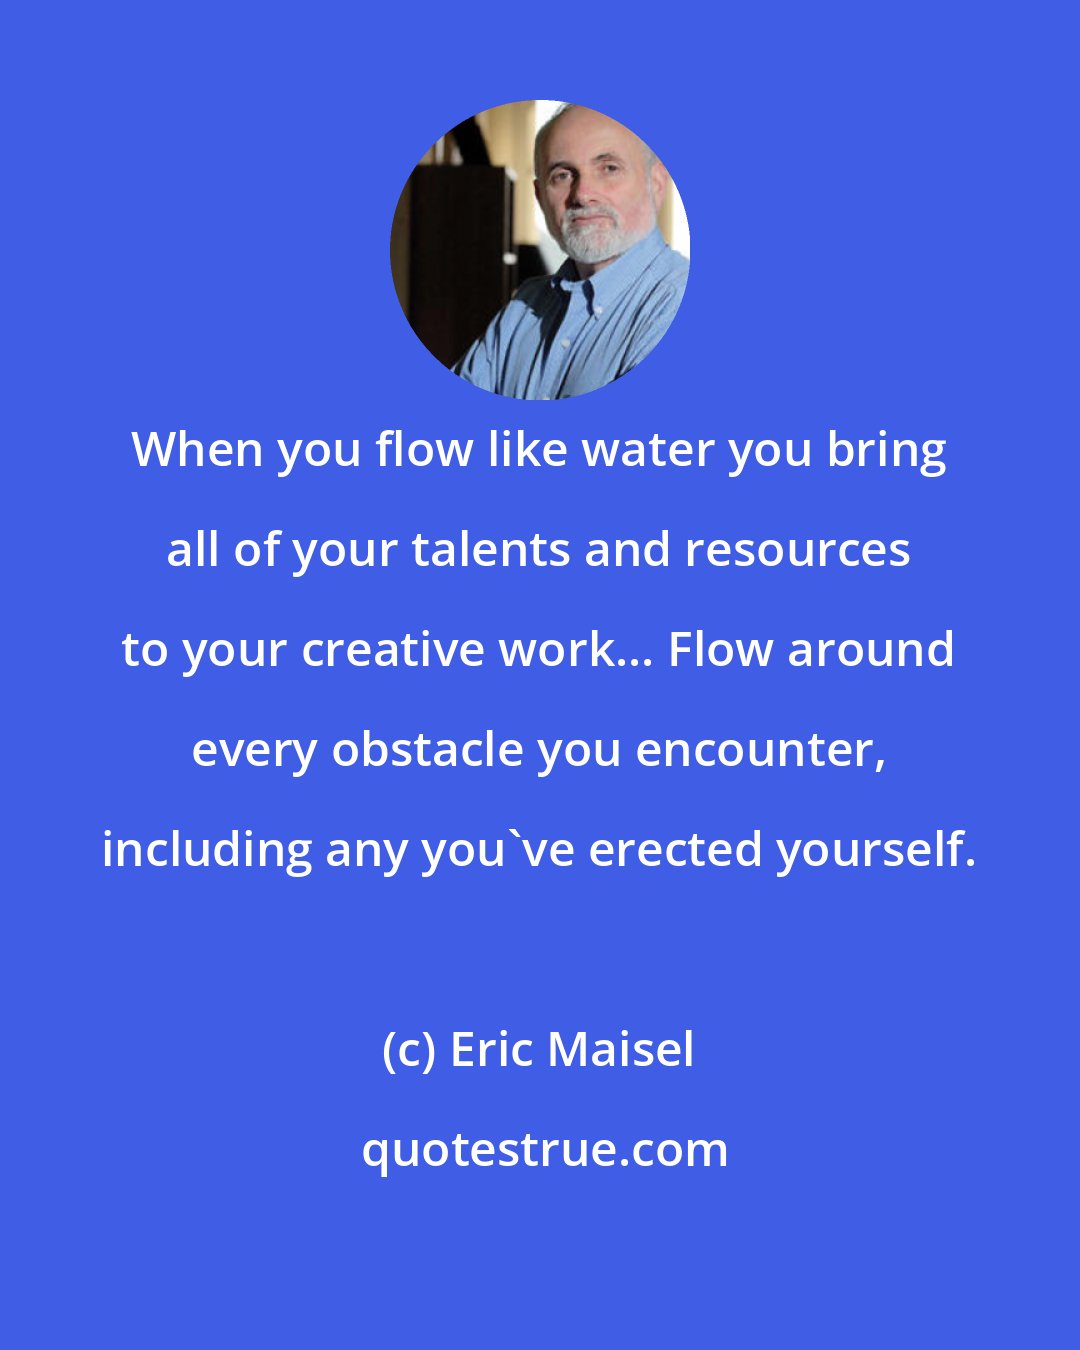 Eric Maisel: When you flow like water you bring all of your talents and resources to your creative work... Flow around every obstacle you encounter, including any you've erected yourself.